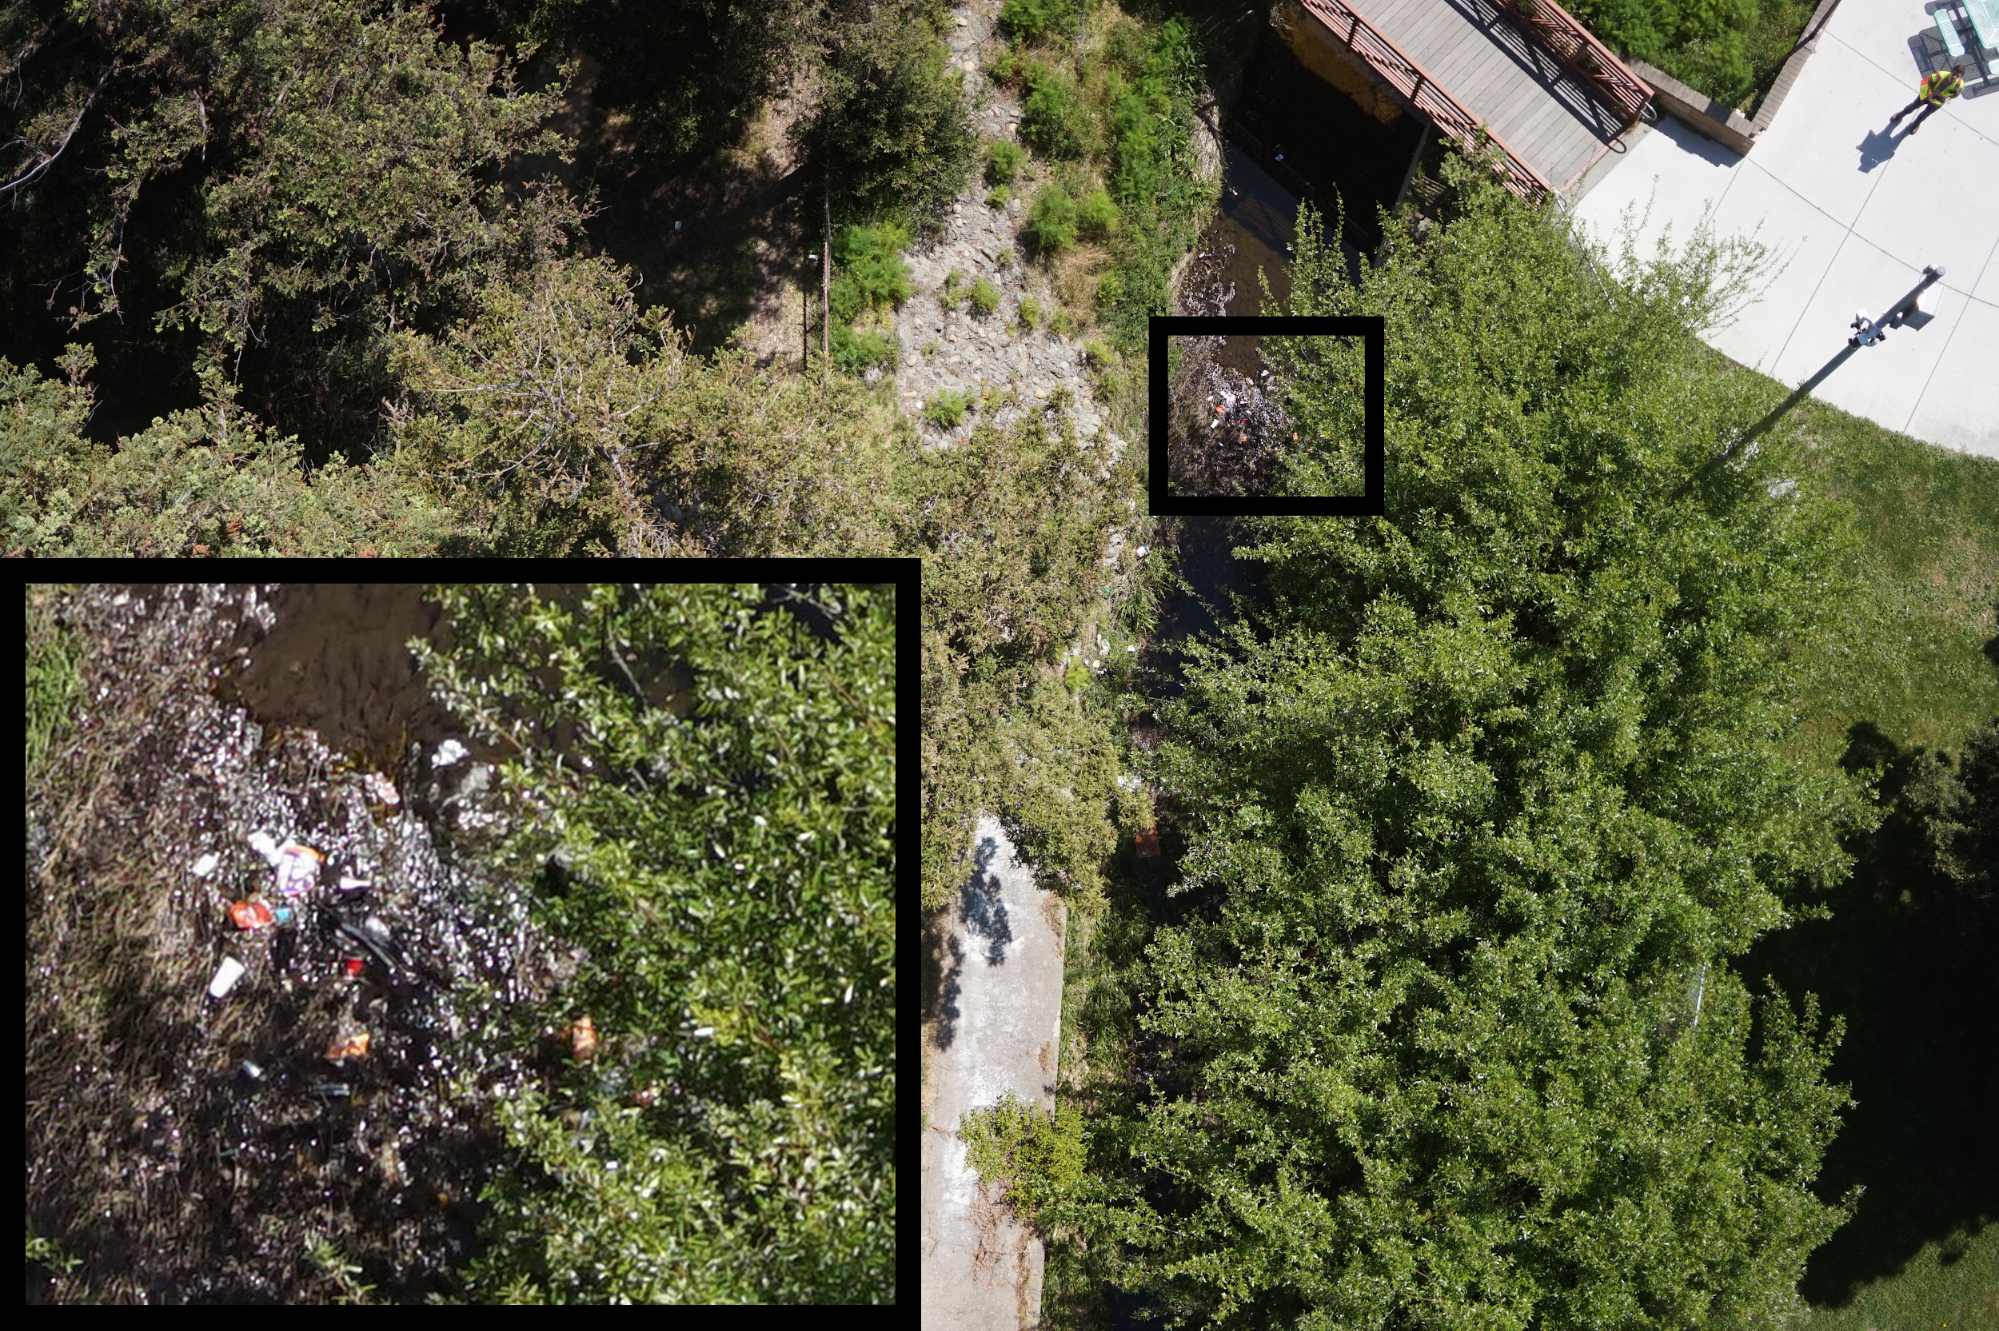 Trash near a bridge in Herbert Park in San Pablo, CA, May 1, 2018. This image is from aerial research conducted by Tony Hale and Pete Kauhanen of the San Francisco Estuary Institute. Image credit: SFEI